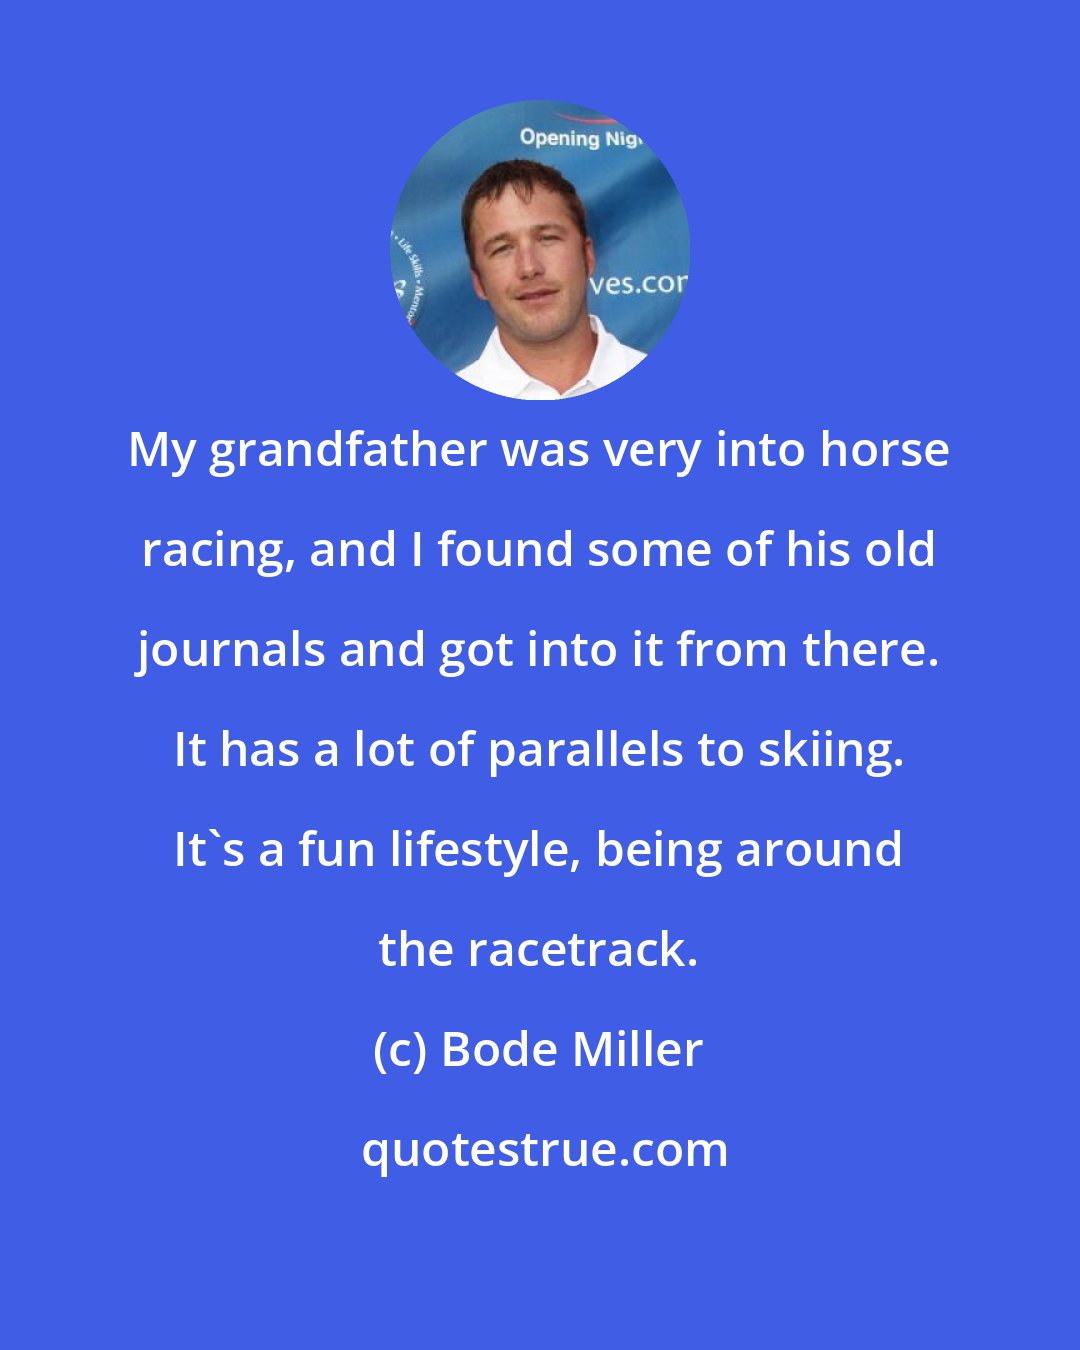 Bode Miller: My grandfather was very into horse racing, and I found some of his old journals and got into it from there. It has a lot of parallels to skiing. It's a fun lifestyle, being around the racetrack.